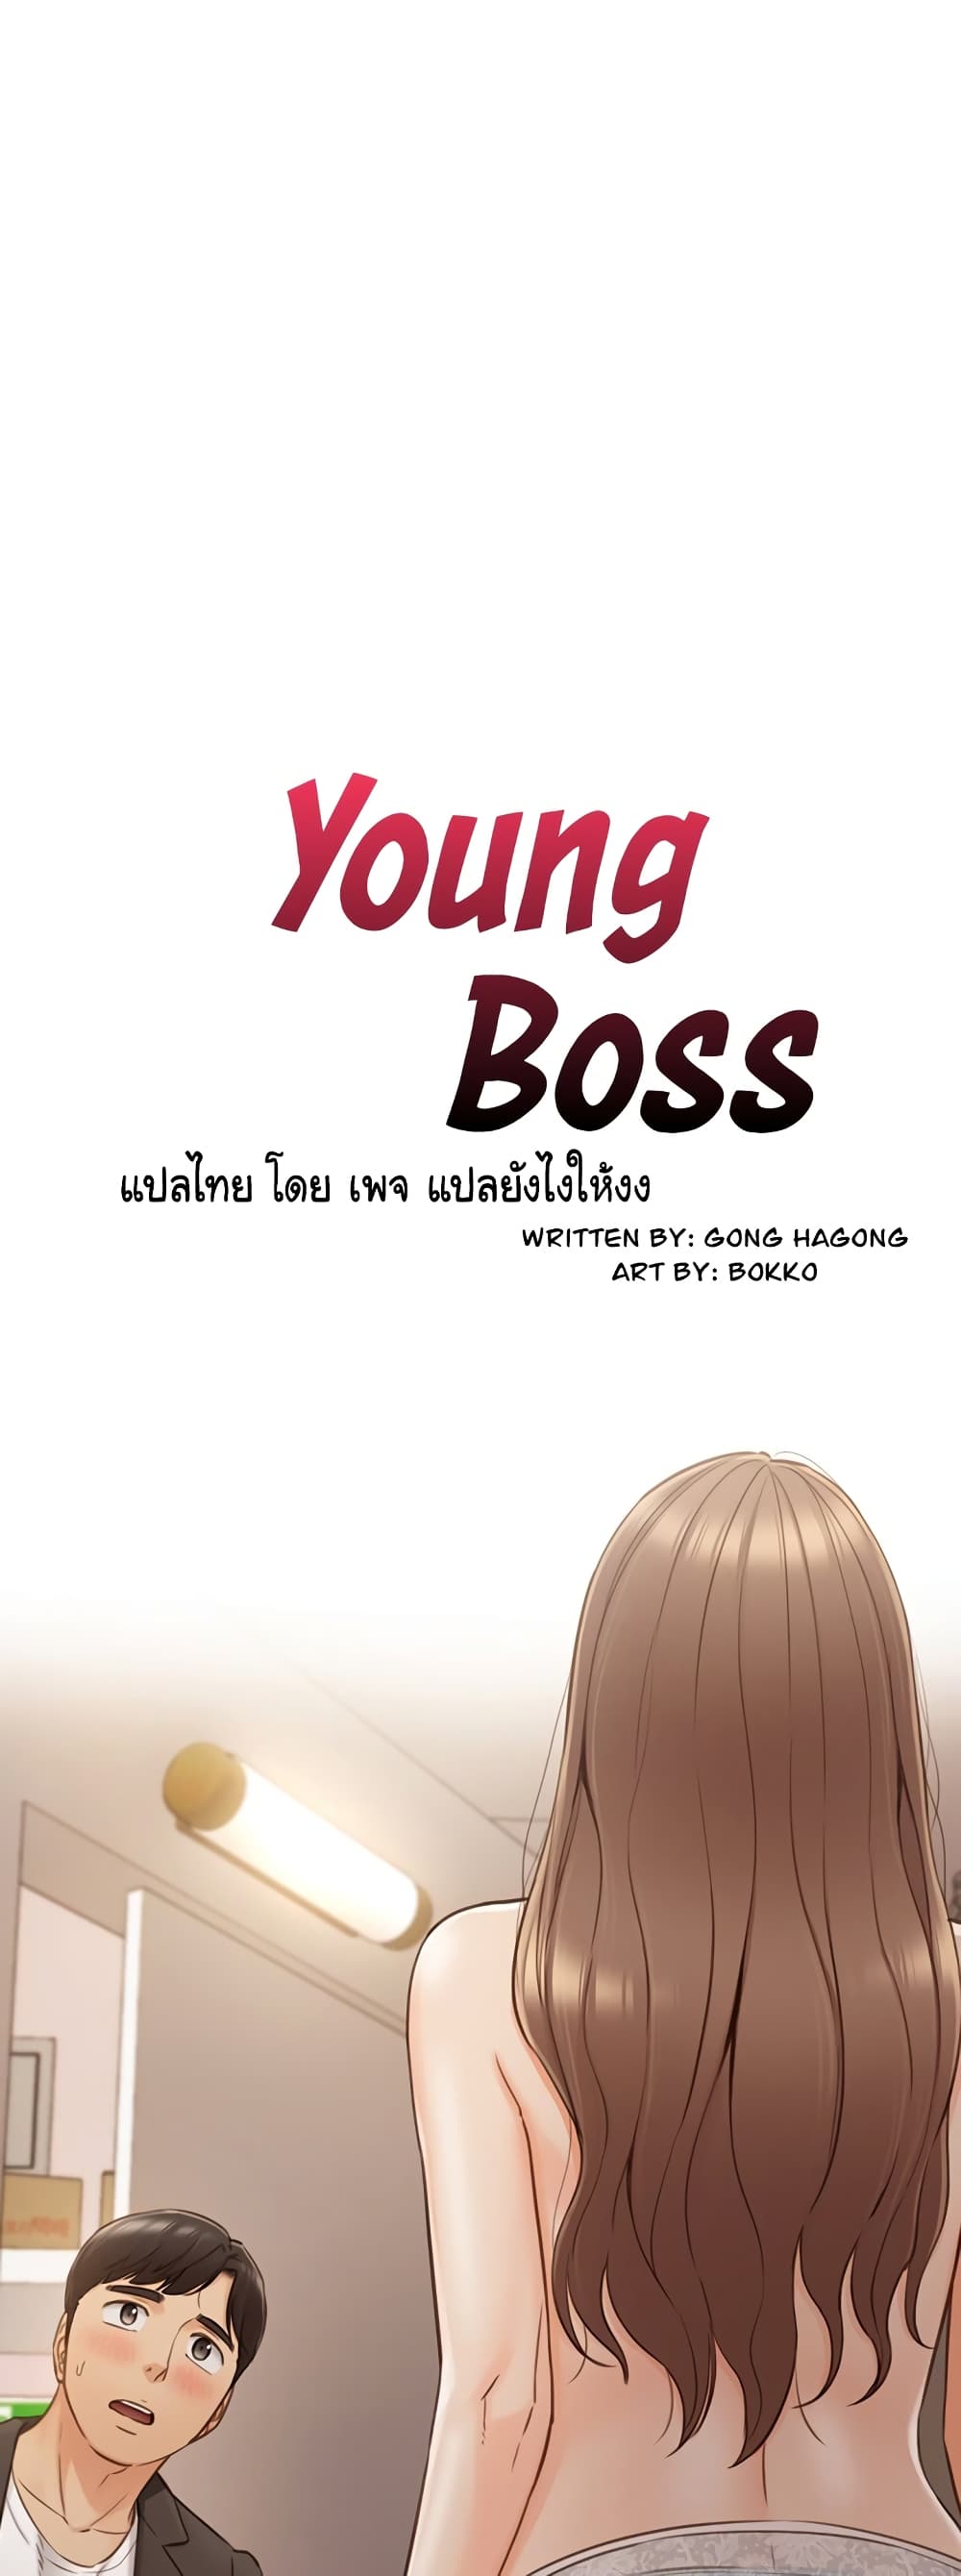 Young Boss 71-71